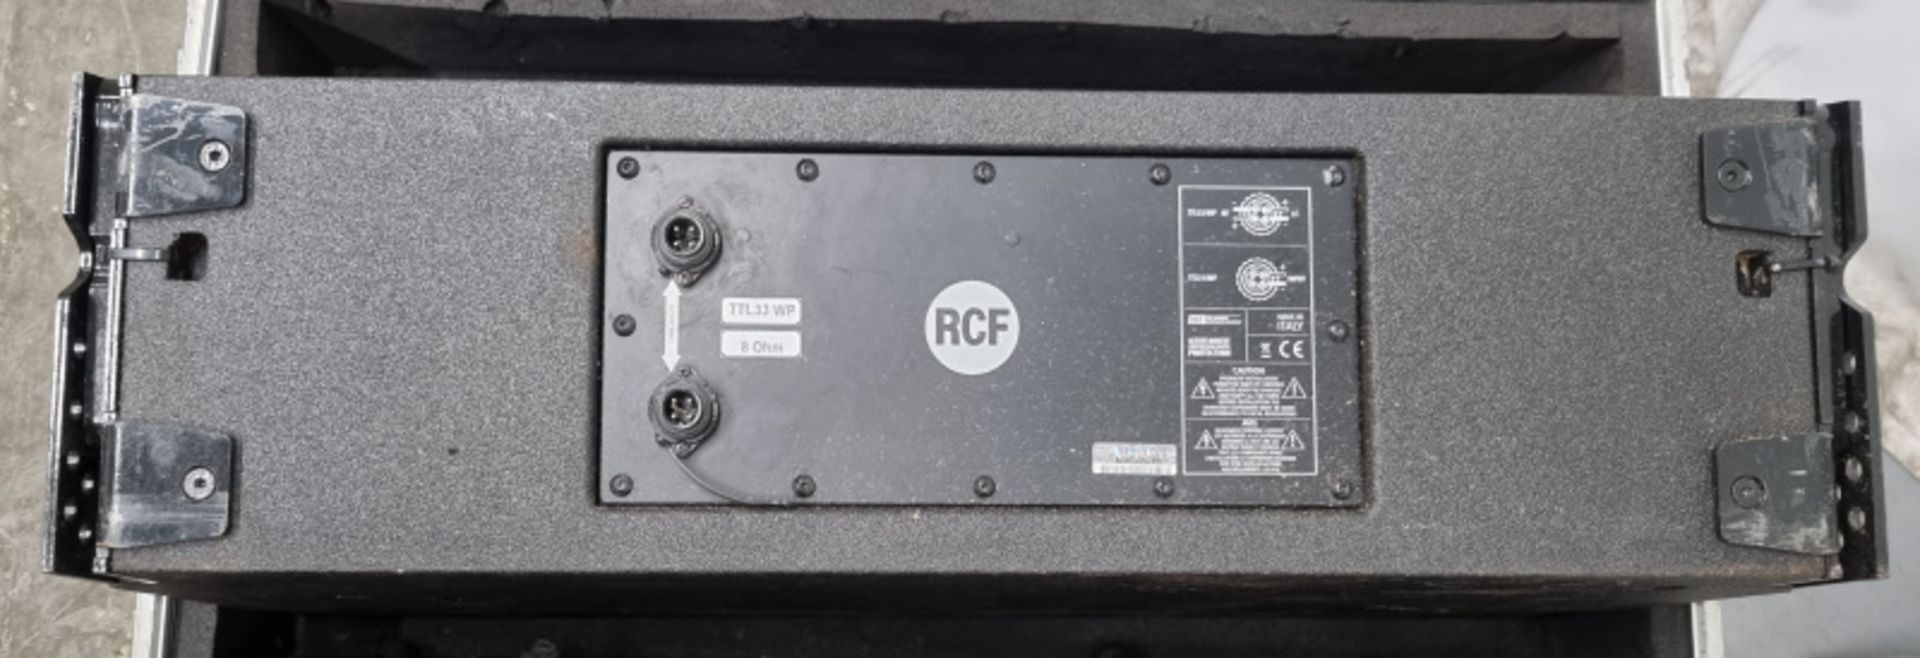 3 x RCF TTL33/WP 3-way active line array module in flight case - Image 3 of 4